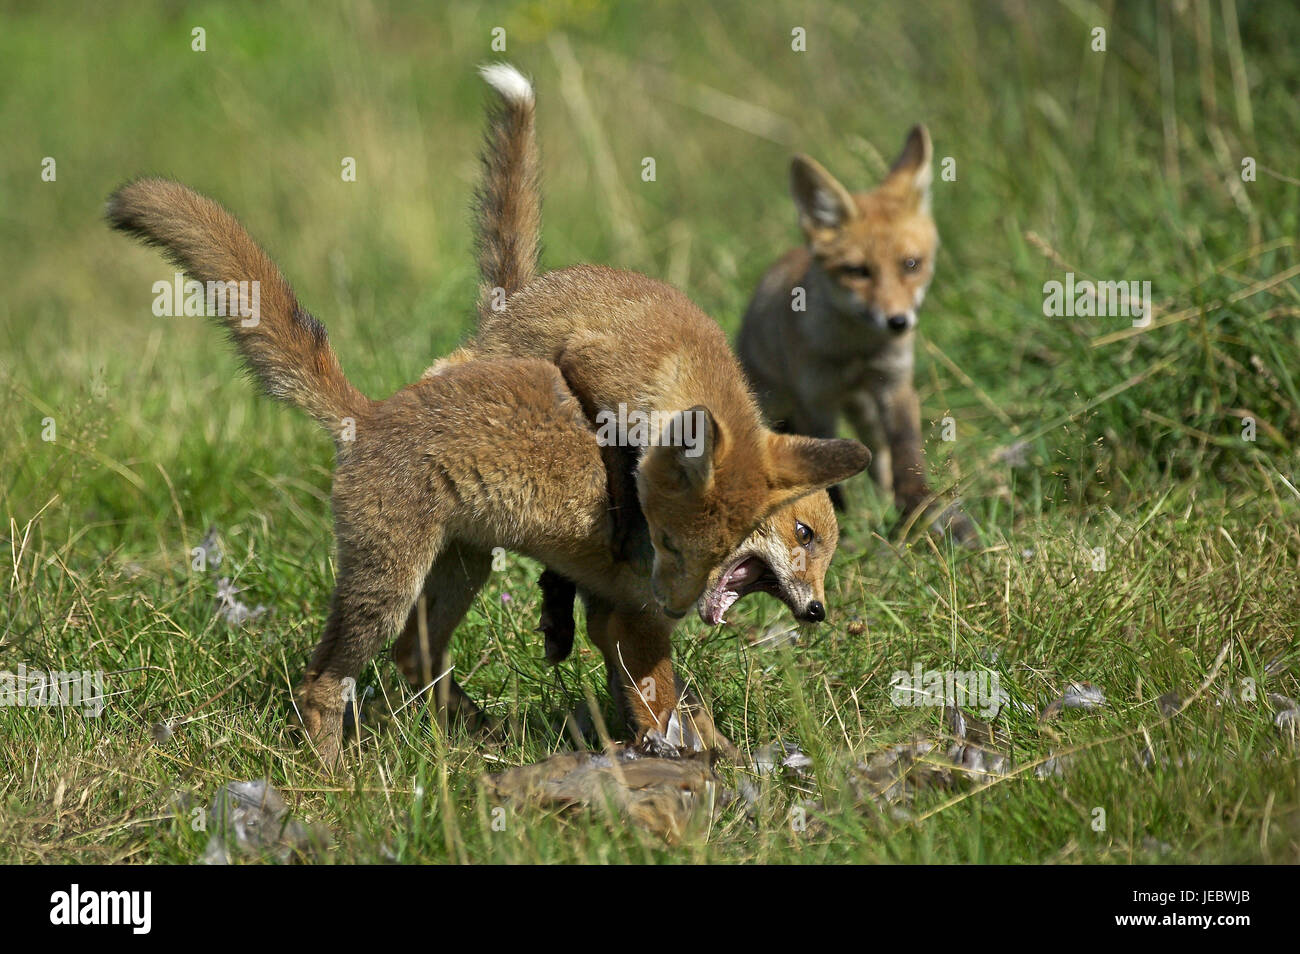 Two red foxes, Vulpes vulpes, young animals, fight, Stock Photo